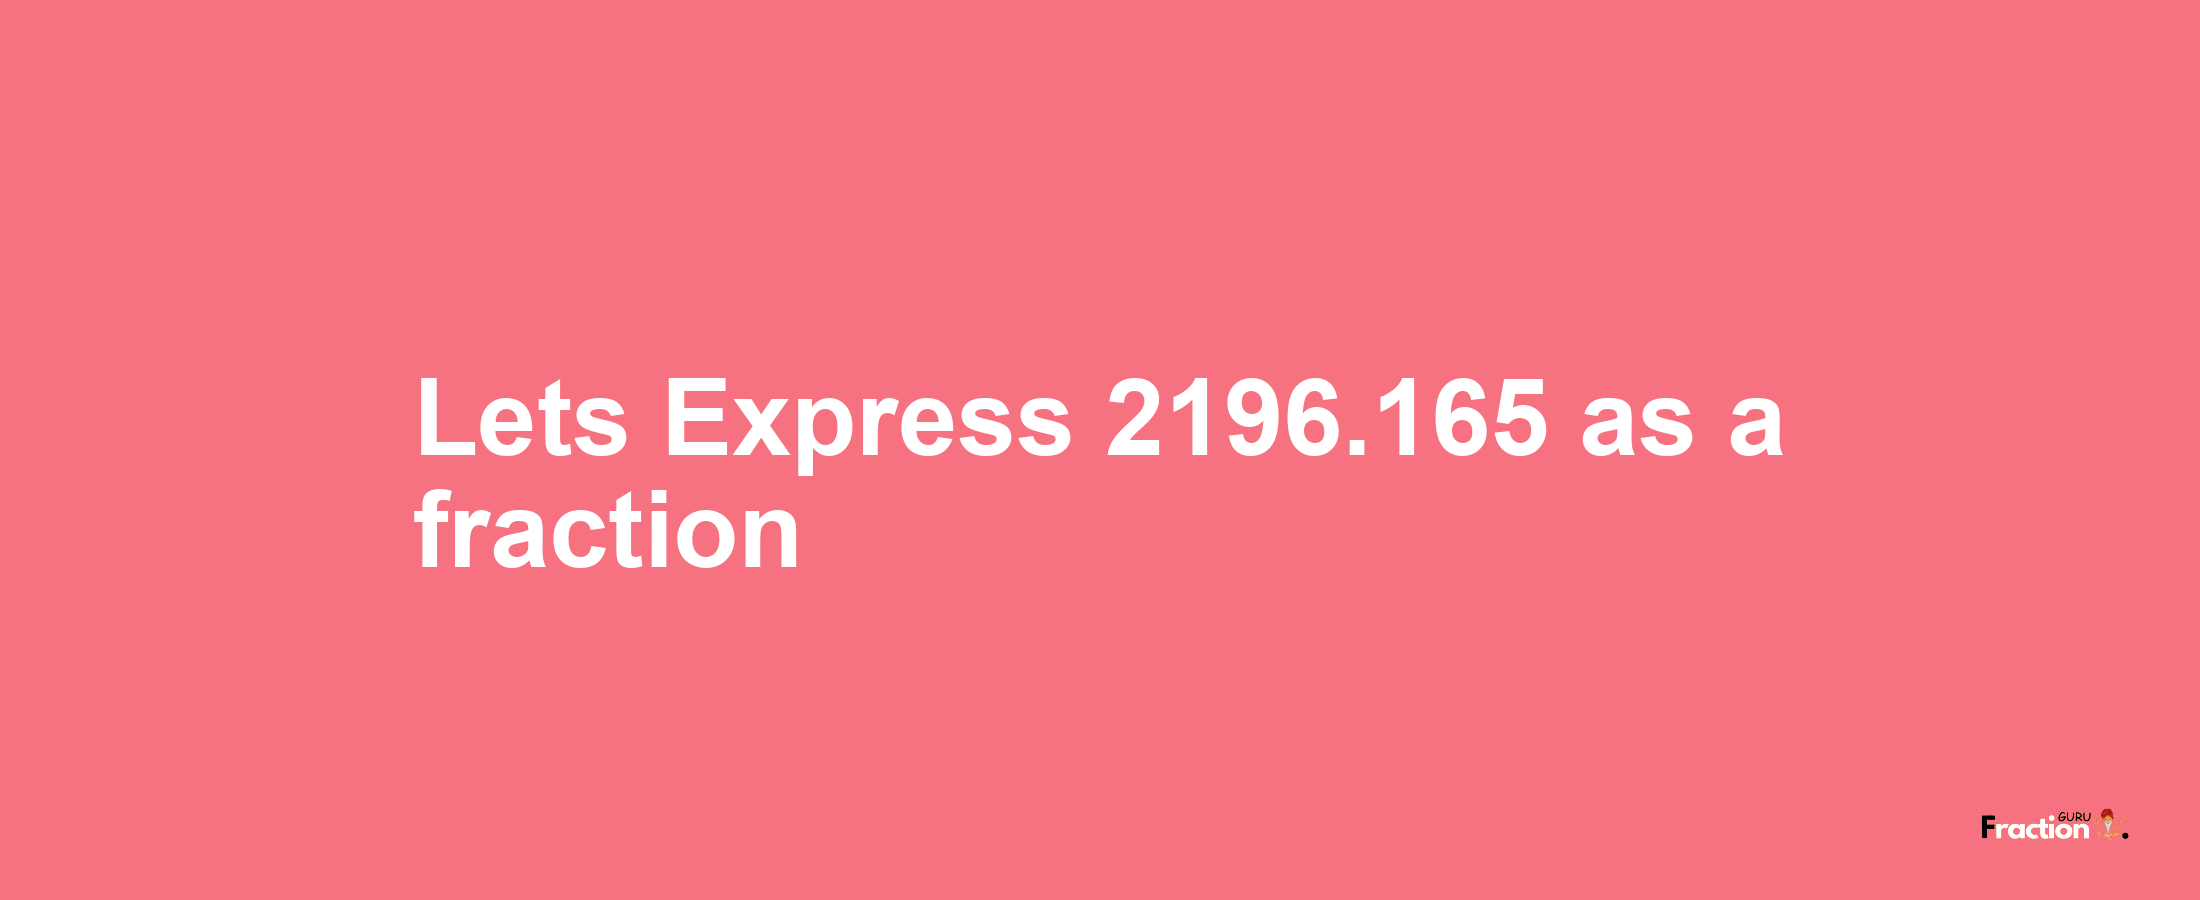 Lets Express 2196.165 as afraction